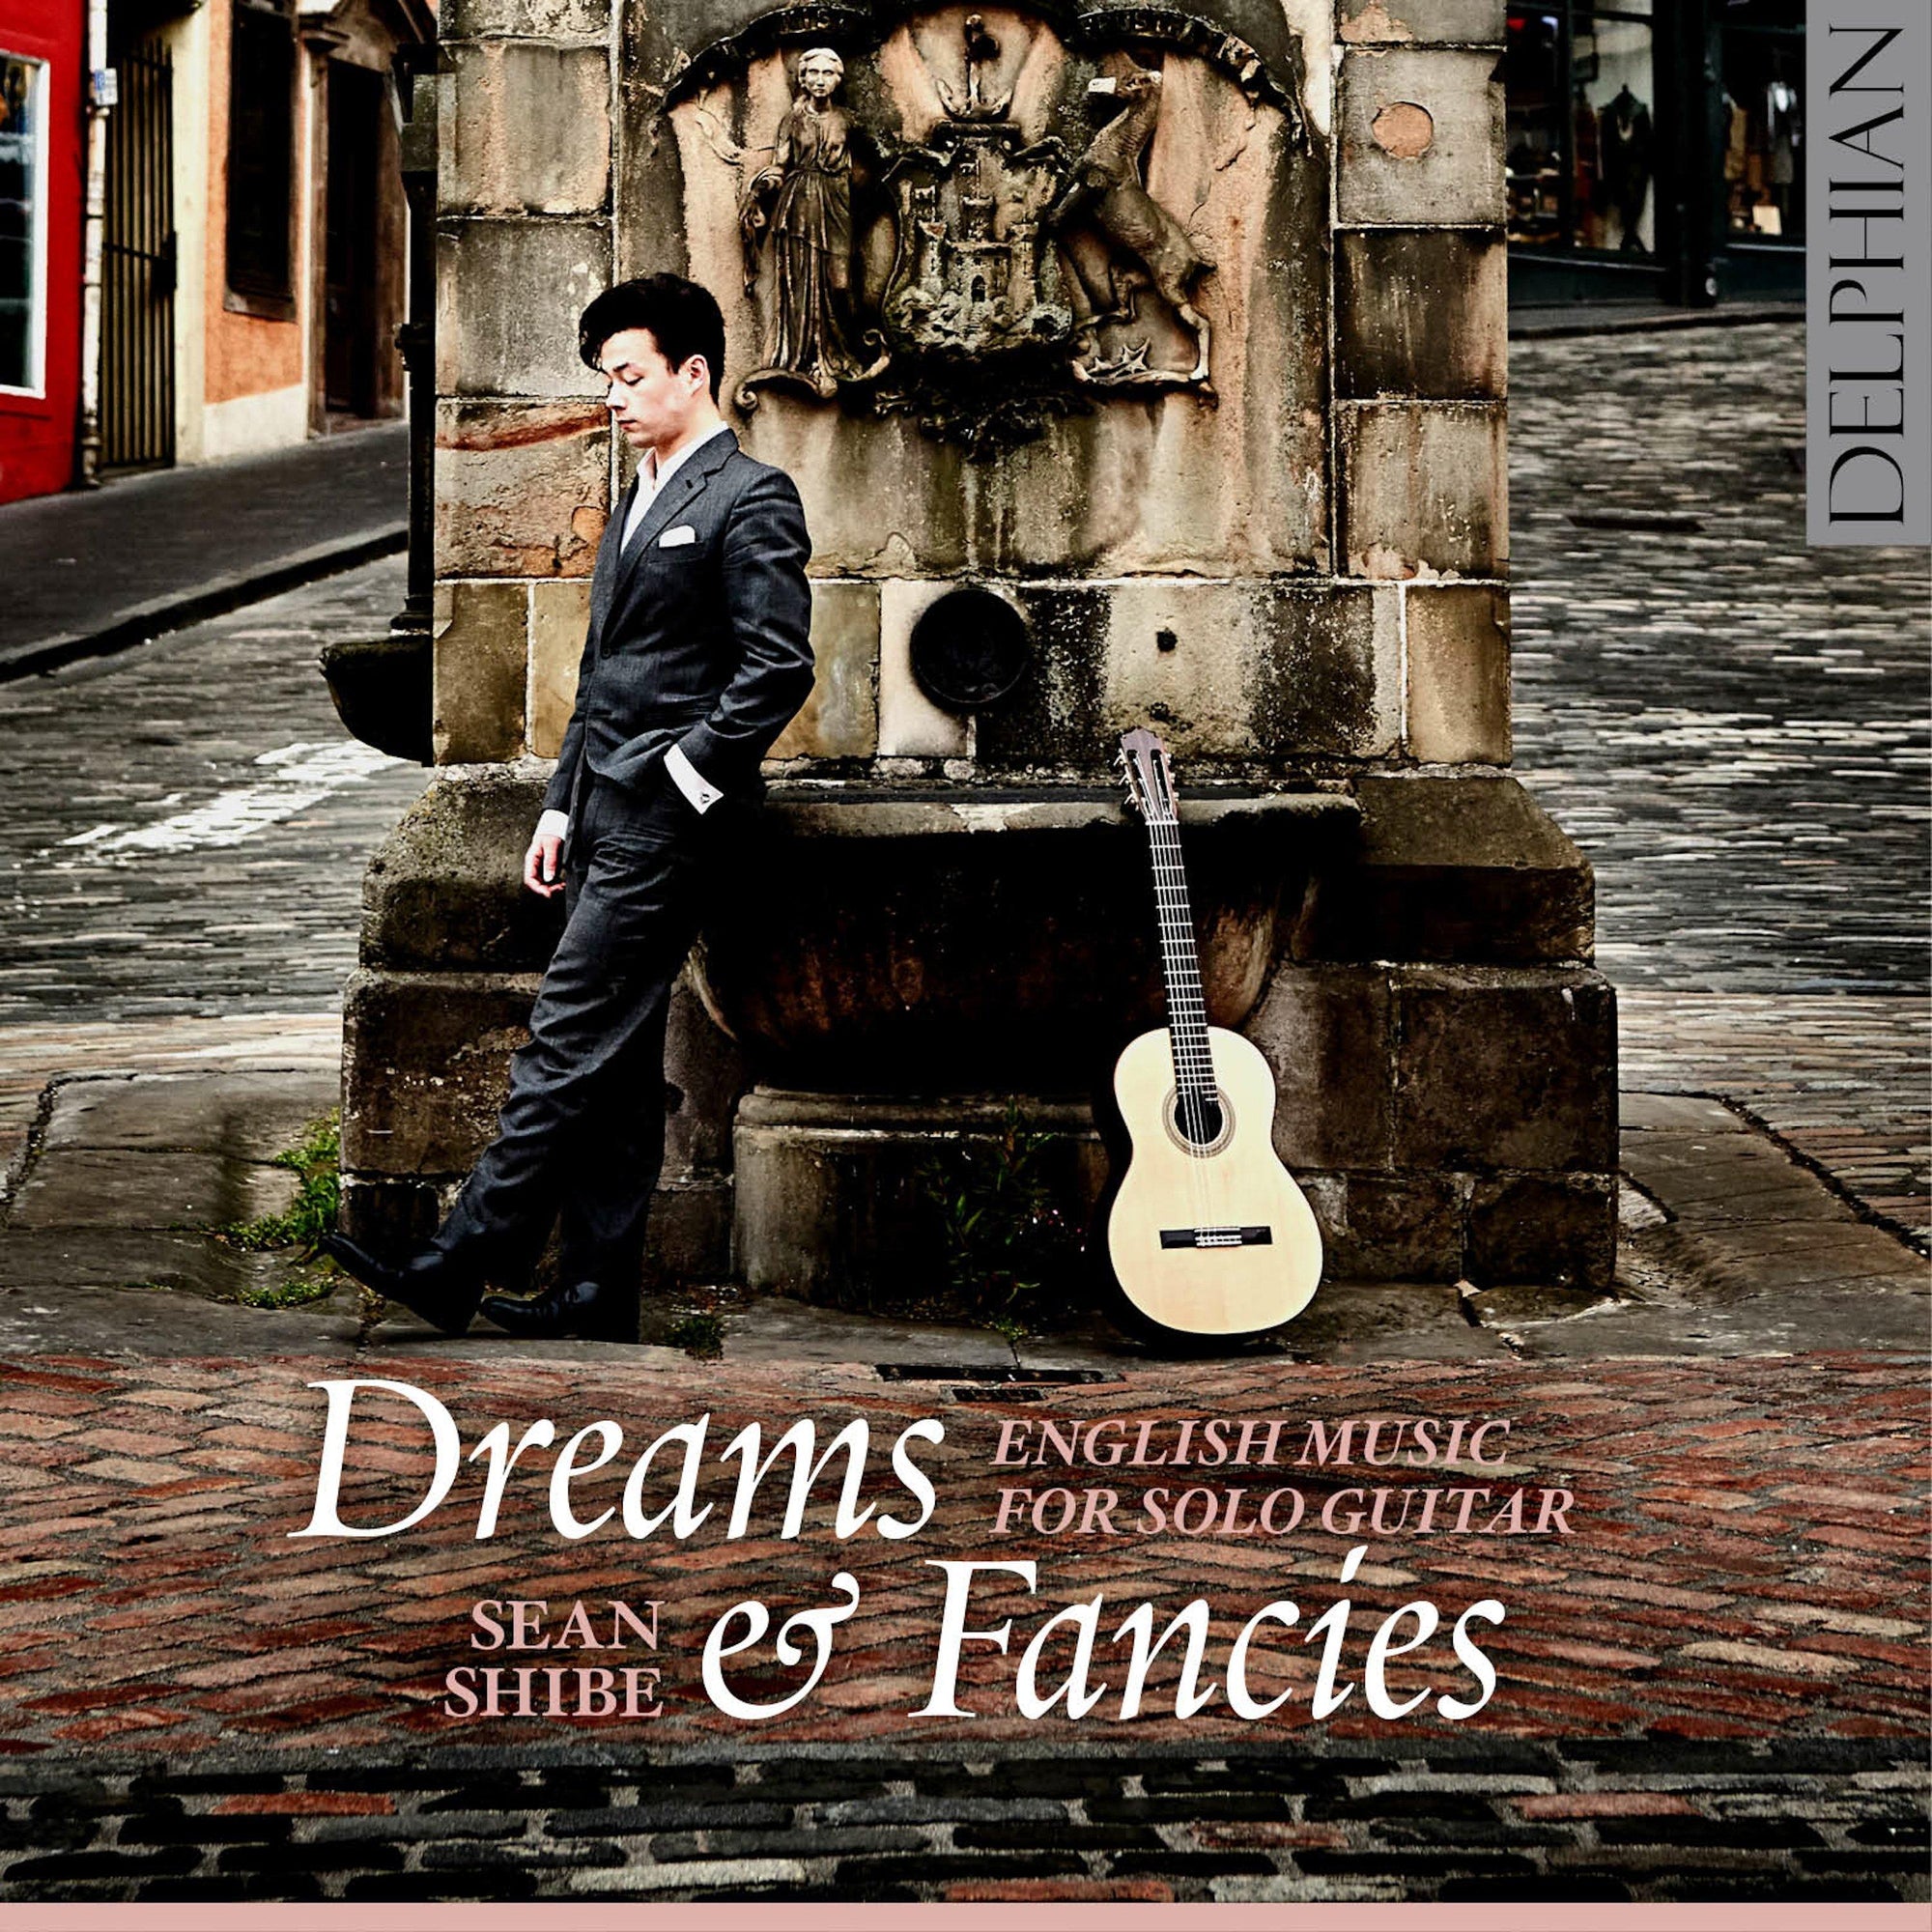 Dreams and Fancies: English music for solo guitar